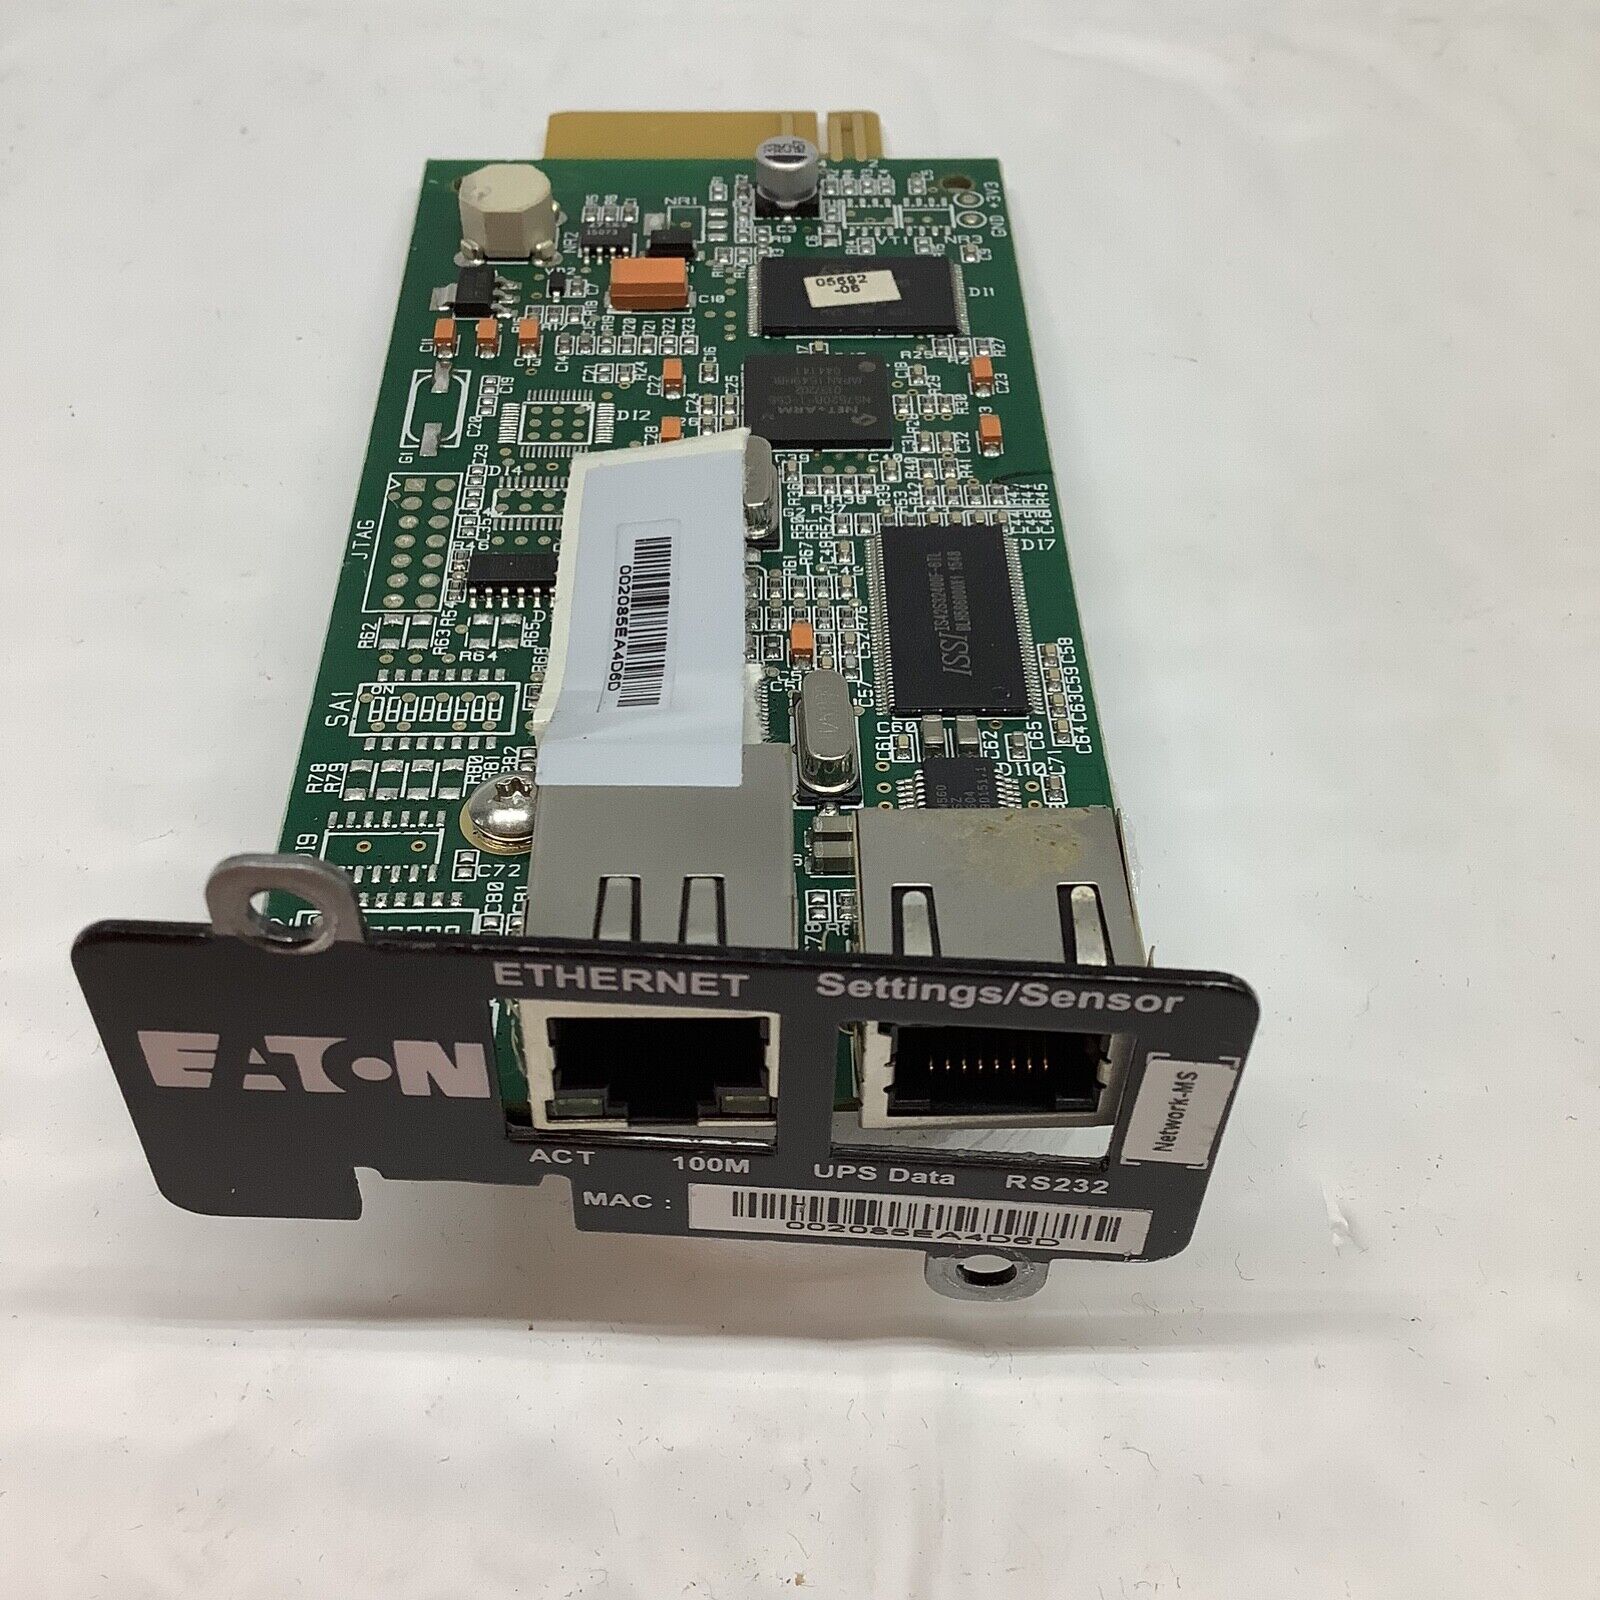 Eaton Network Card-MS Network Management Card 710-00255-07P